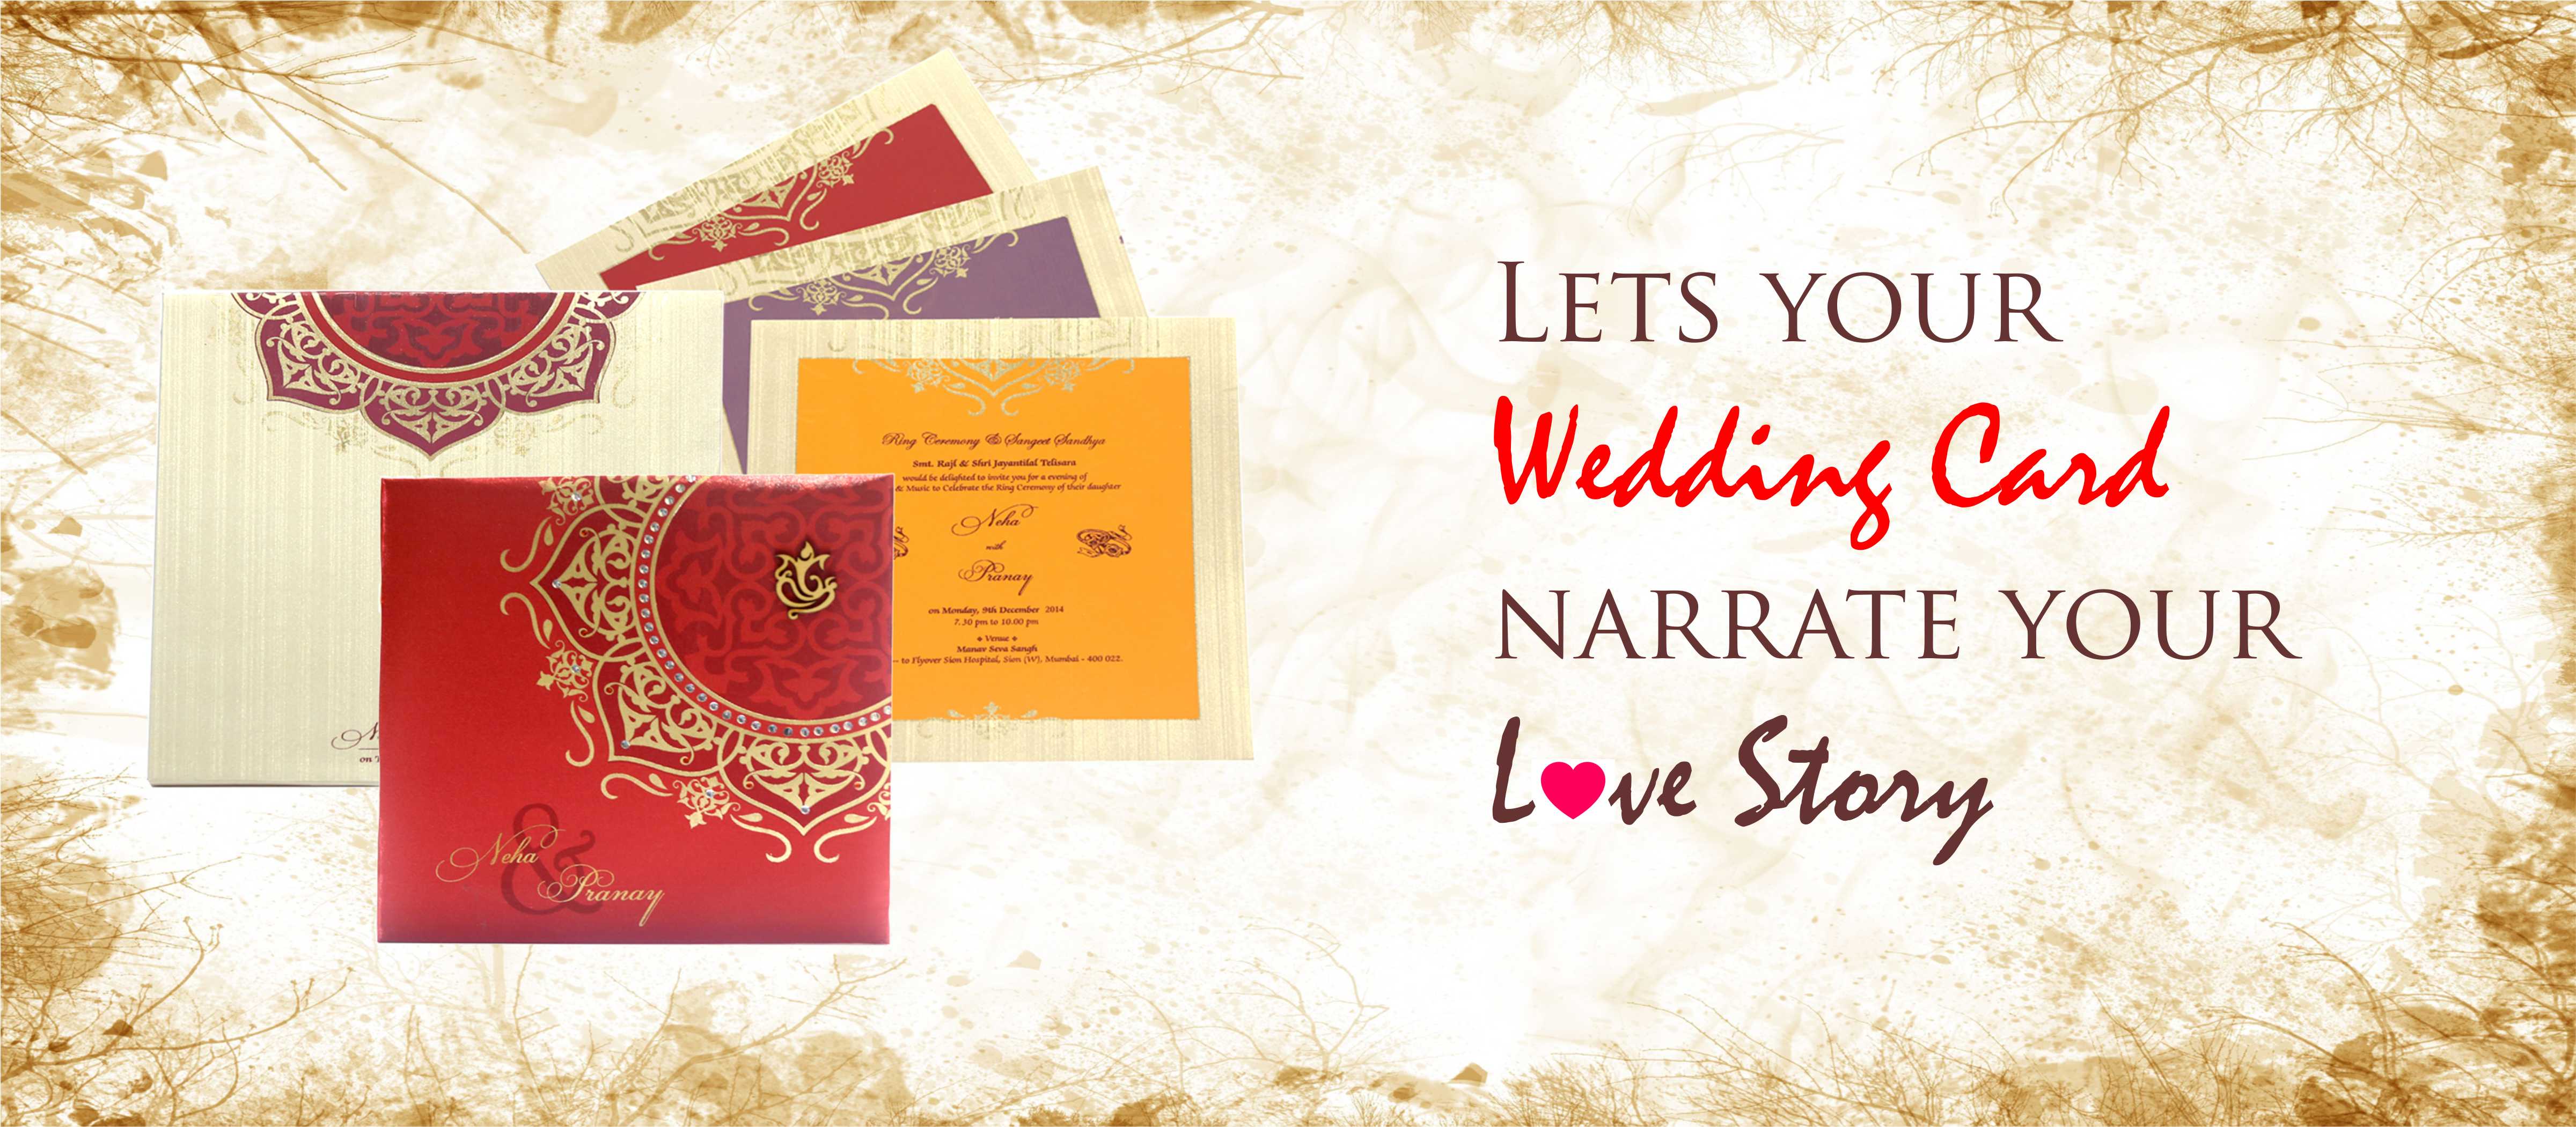 Let Your Wedding Card Narrate Your Love Story - HD Wallpaper 